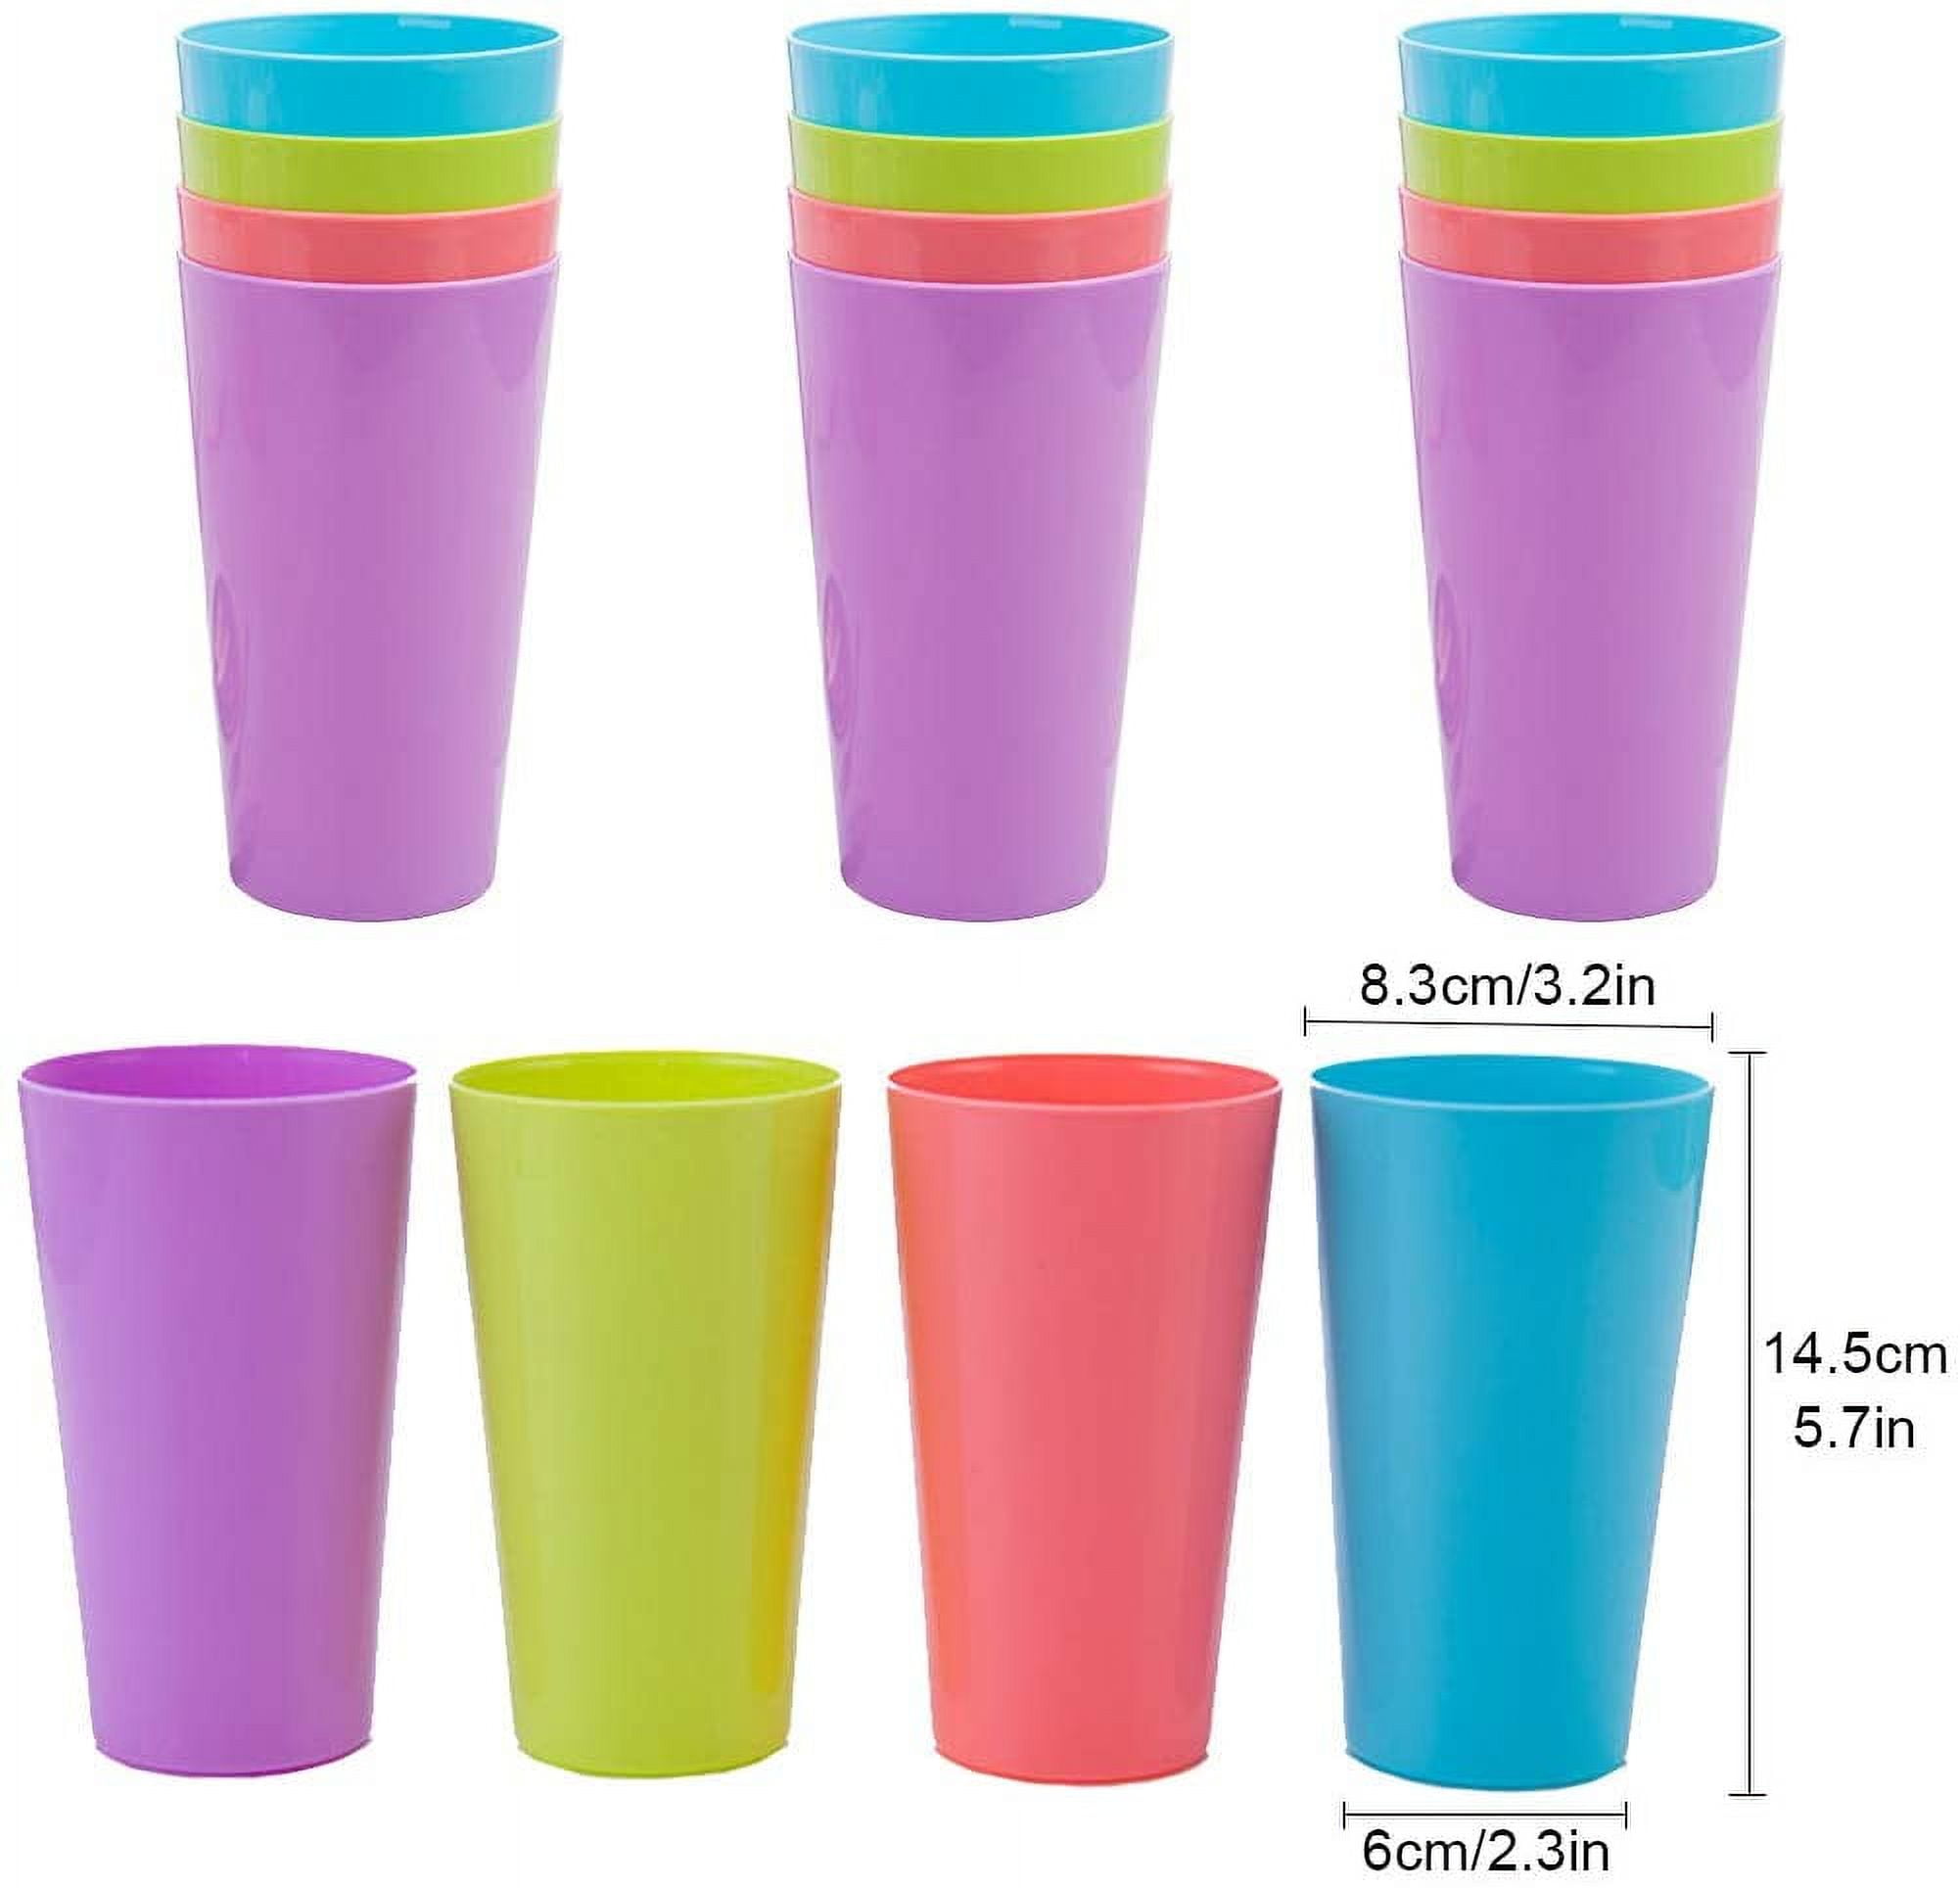 KX-WARE 32-ounce Plastic Tumblers Large Drinking Glasses, Set  of 12 Multicolor - Unbreakable, Dishwasher Safe, BPA Free: Tumblers & Water  Glasses